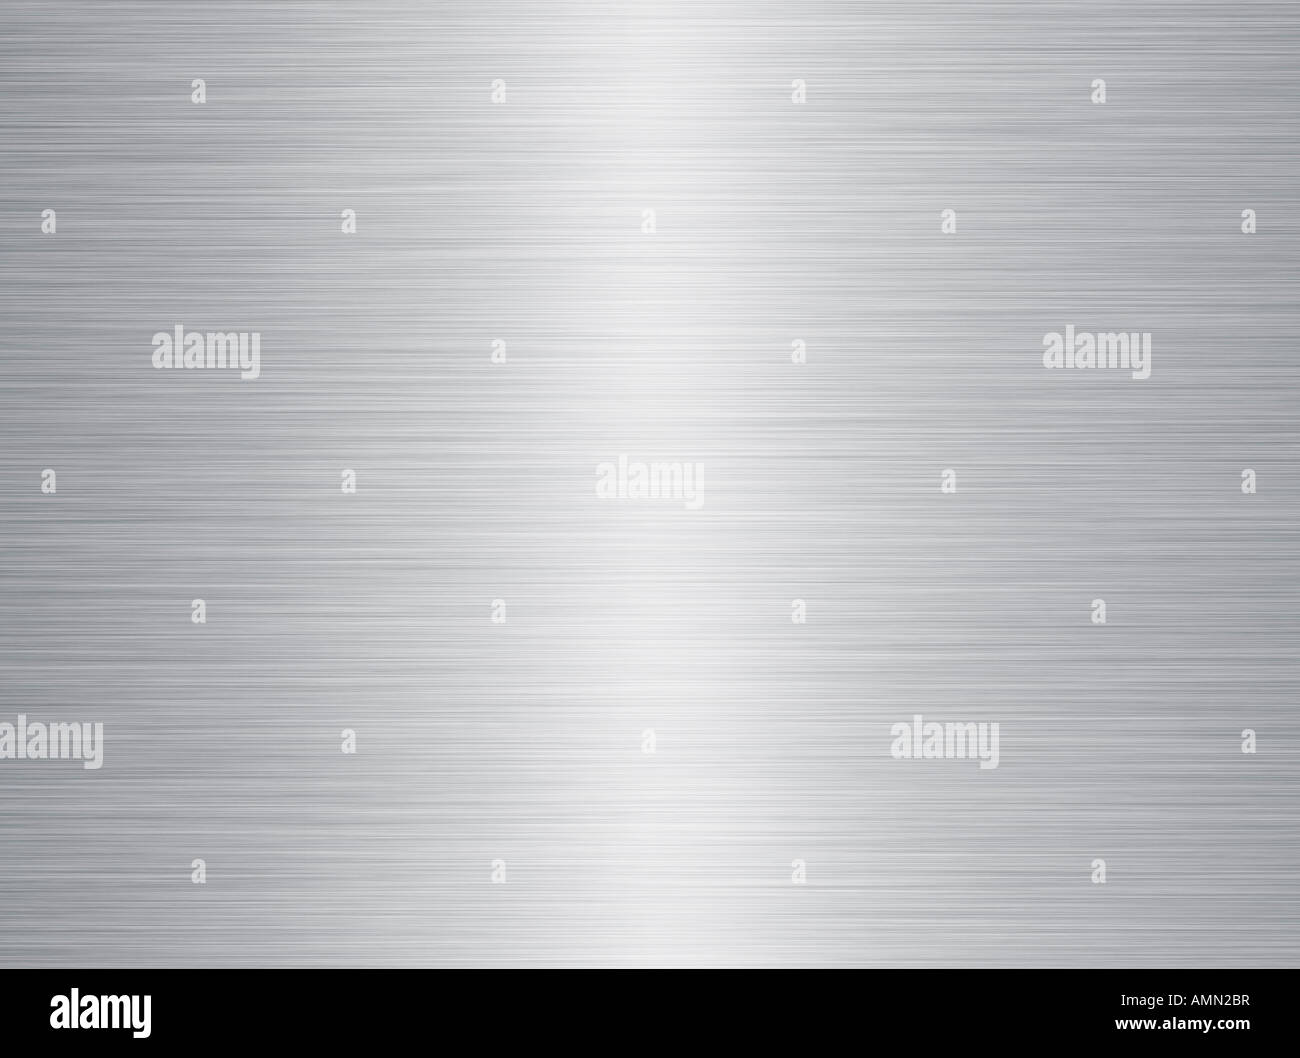 a very large sheet of rendered brushed steel or metal Stock Photo